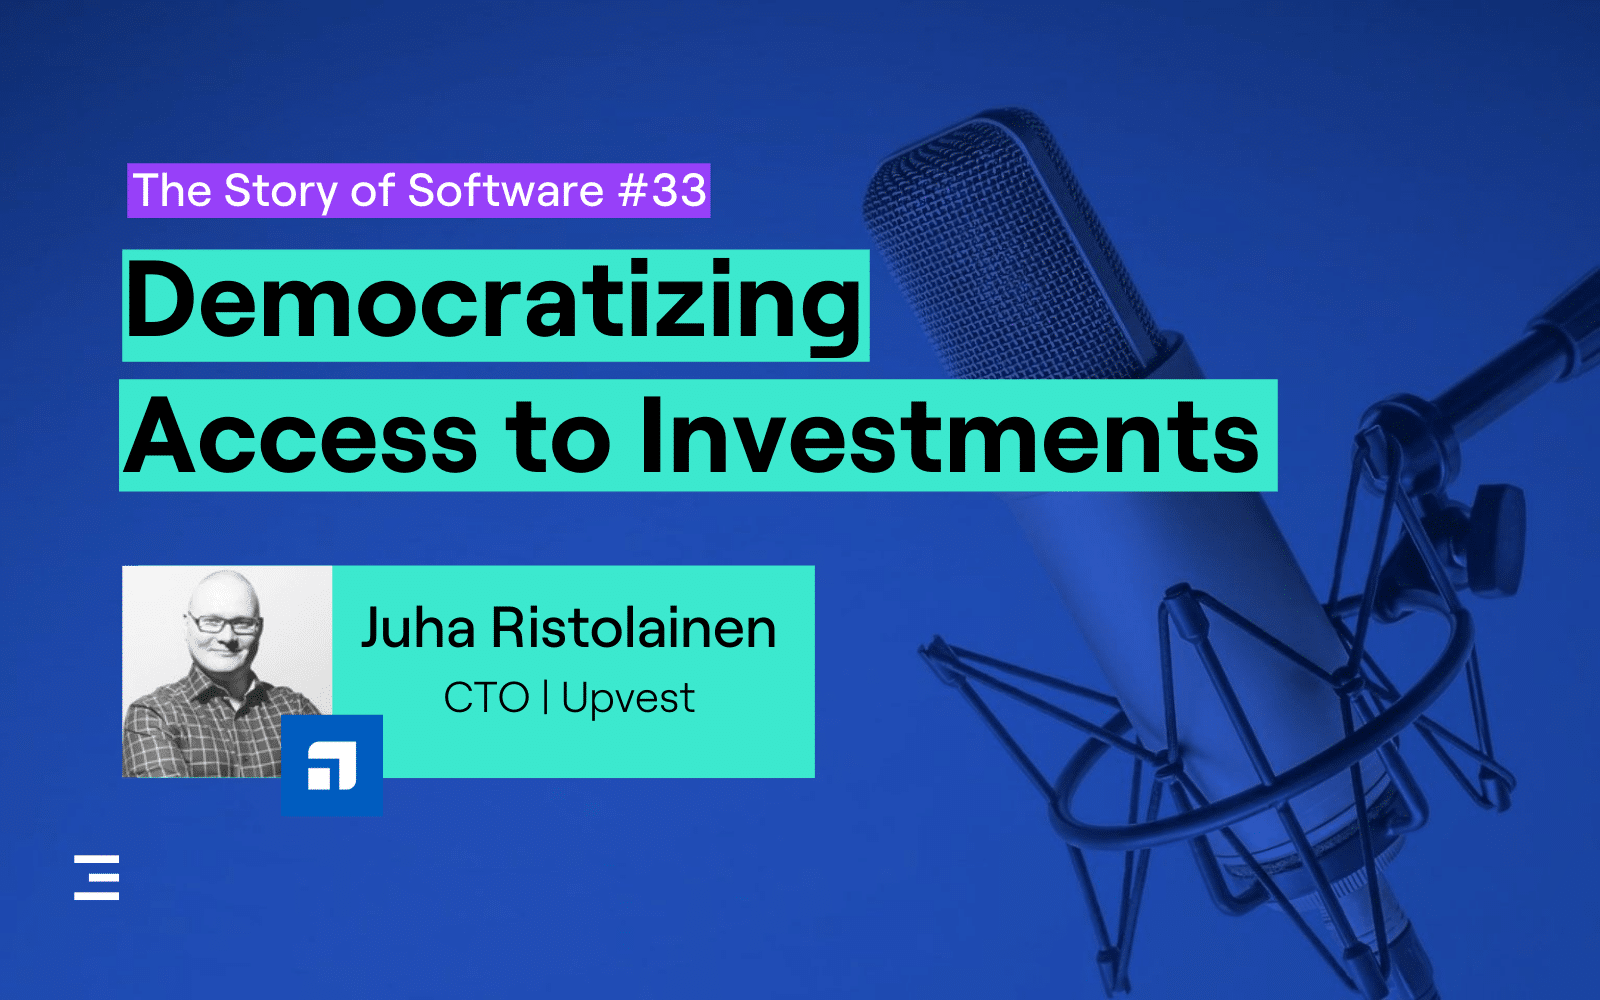 podcast episode on democratizing access to investment